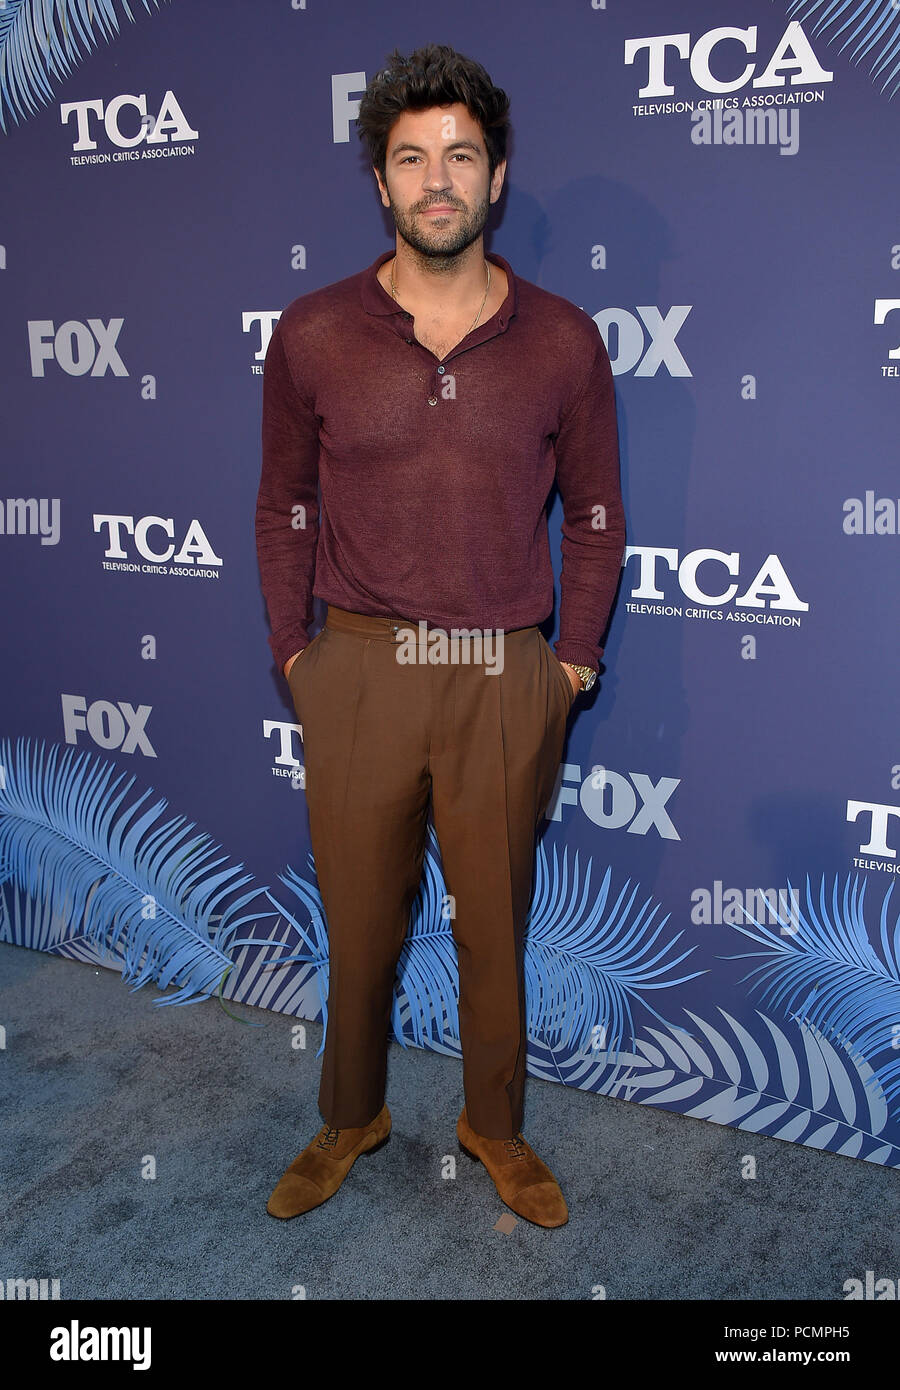 West Hollywood, California, Aug, 2018. Jordan Masterson arrives for the FOX Summer TCA 2018 All-Star Party at Soho House. Credit: Lisa O'Connor/ZUMA Wire/Alamy Live News Stock Photo - Alamy